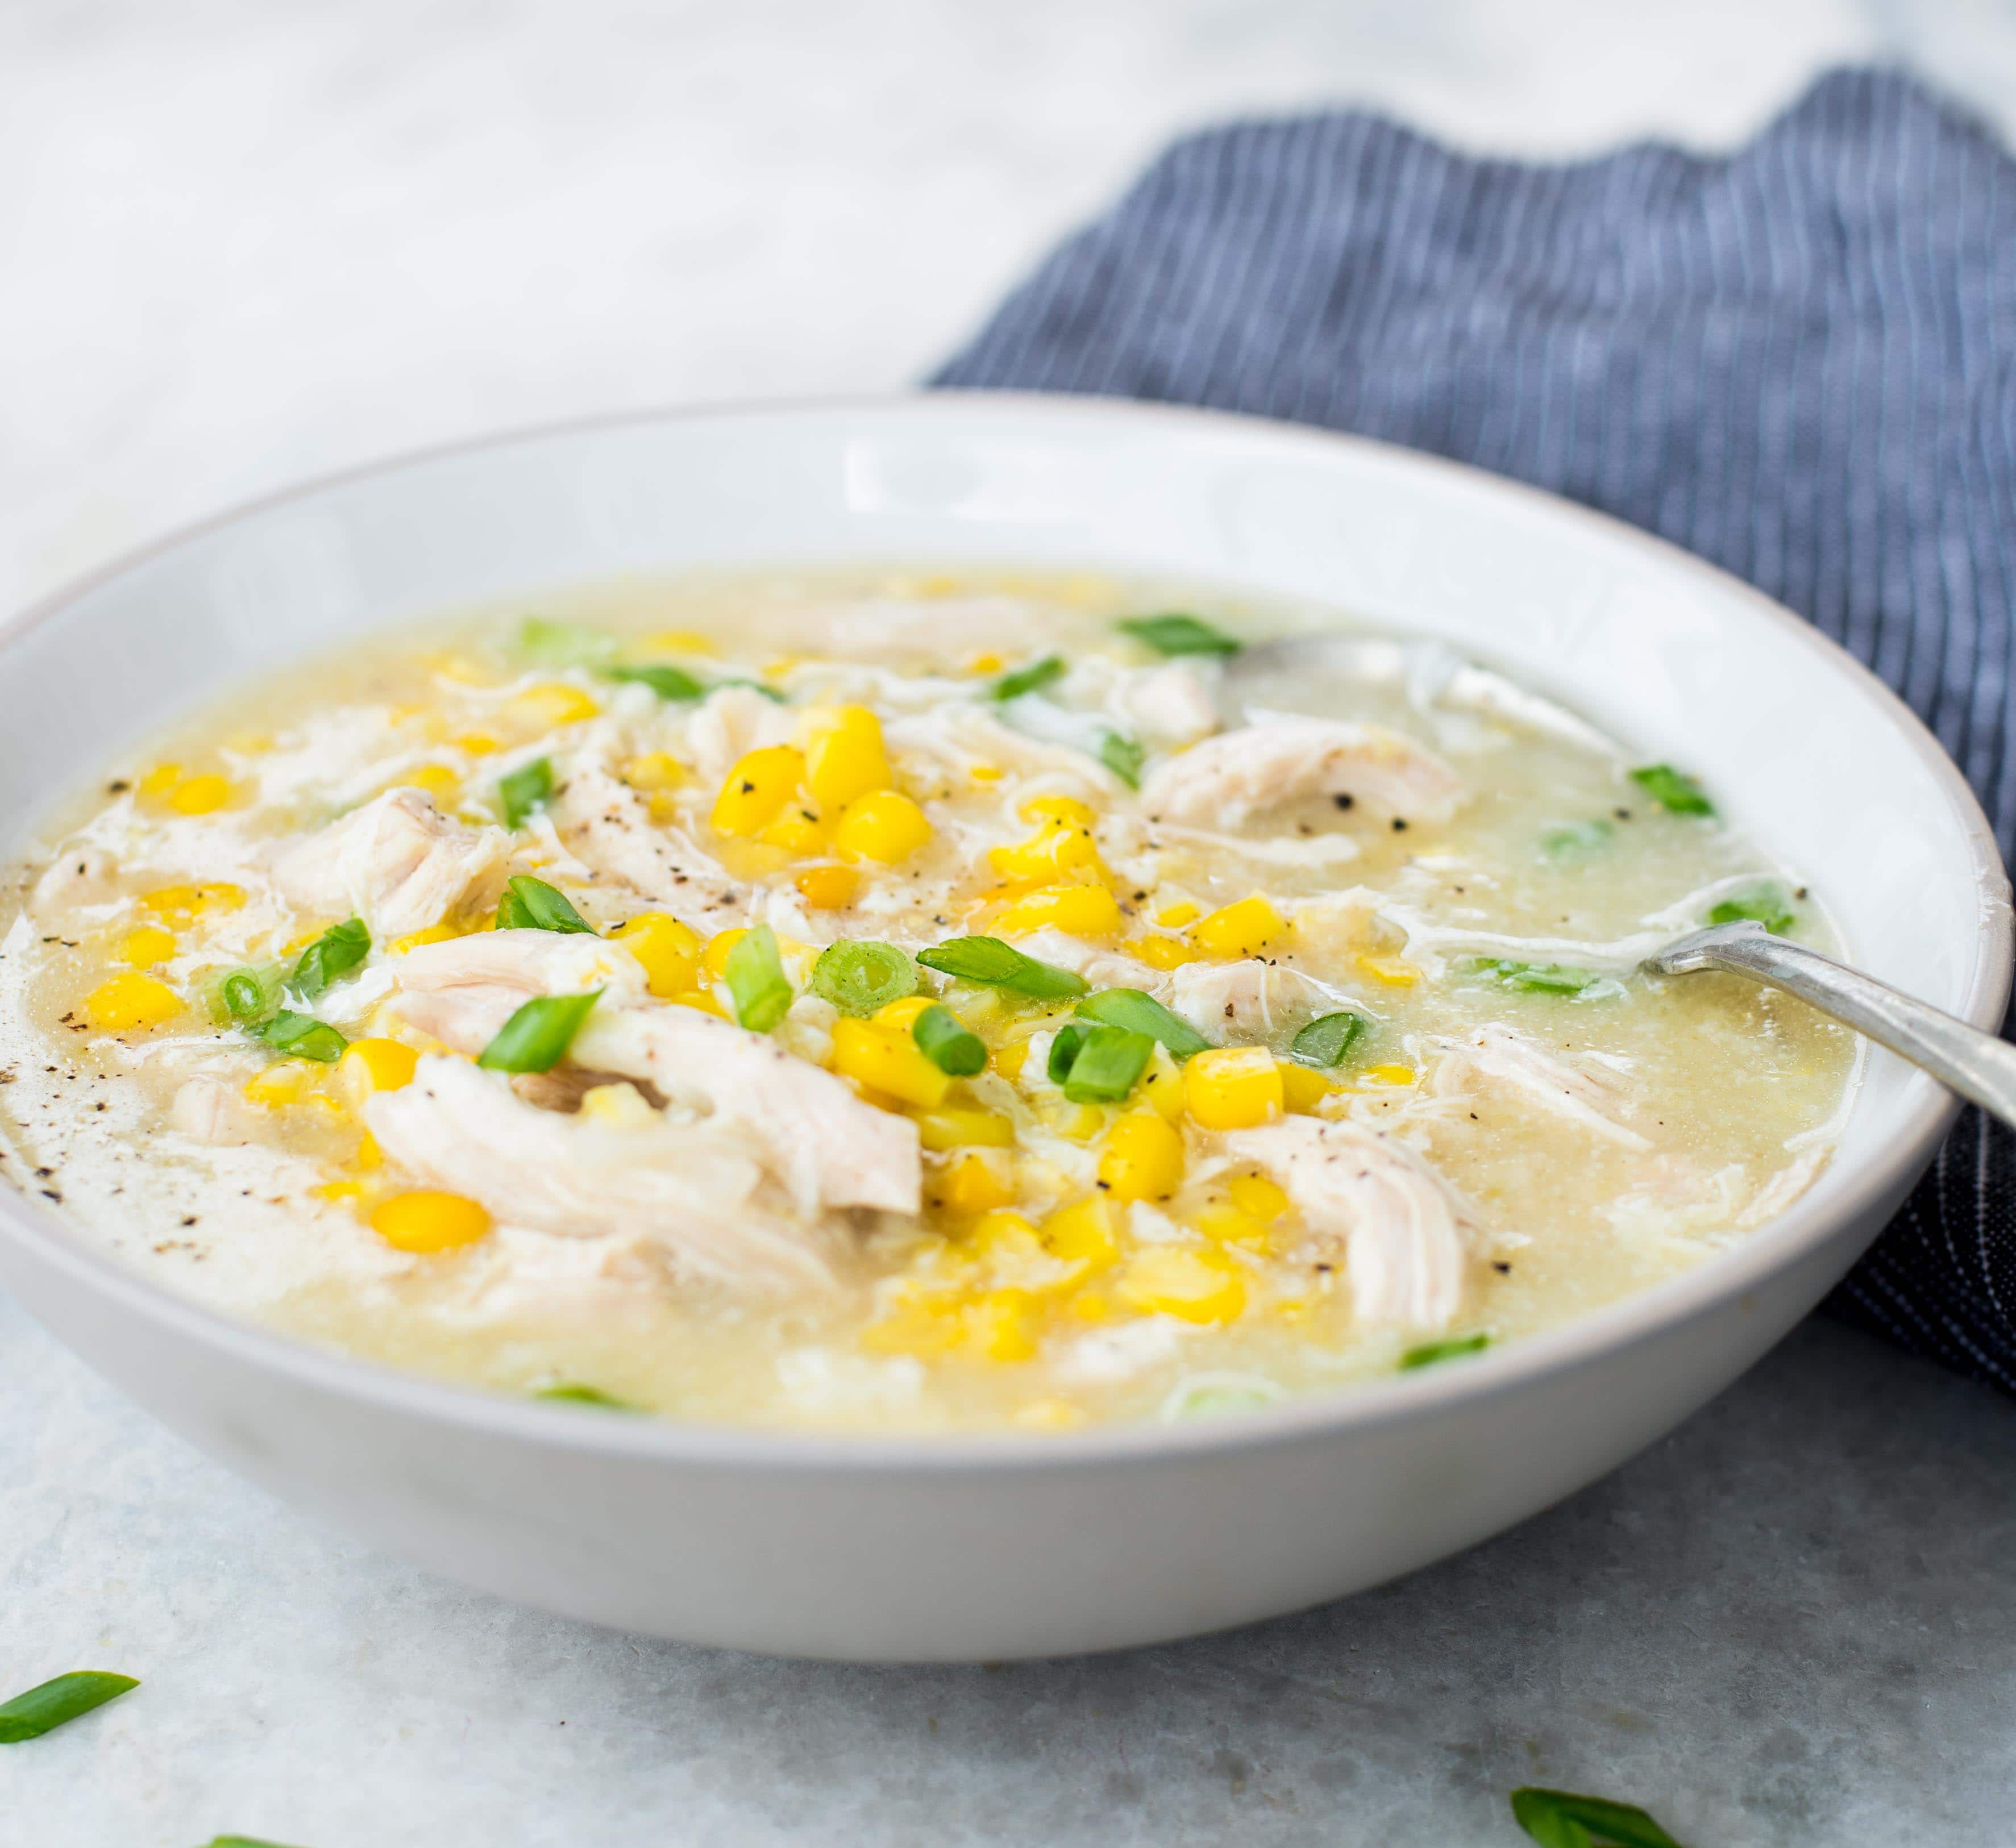 Thick and Creamy Sweet Corn Chicken Soup is an Indo-Chinese Soup that takes just 20 minutes to make. Watch the detailed video to learn how to make this easy Corn Chicken soup in an Instant Pot from scratch. Stove Top instructions also included in case if you don't have an Instant Pot.